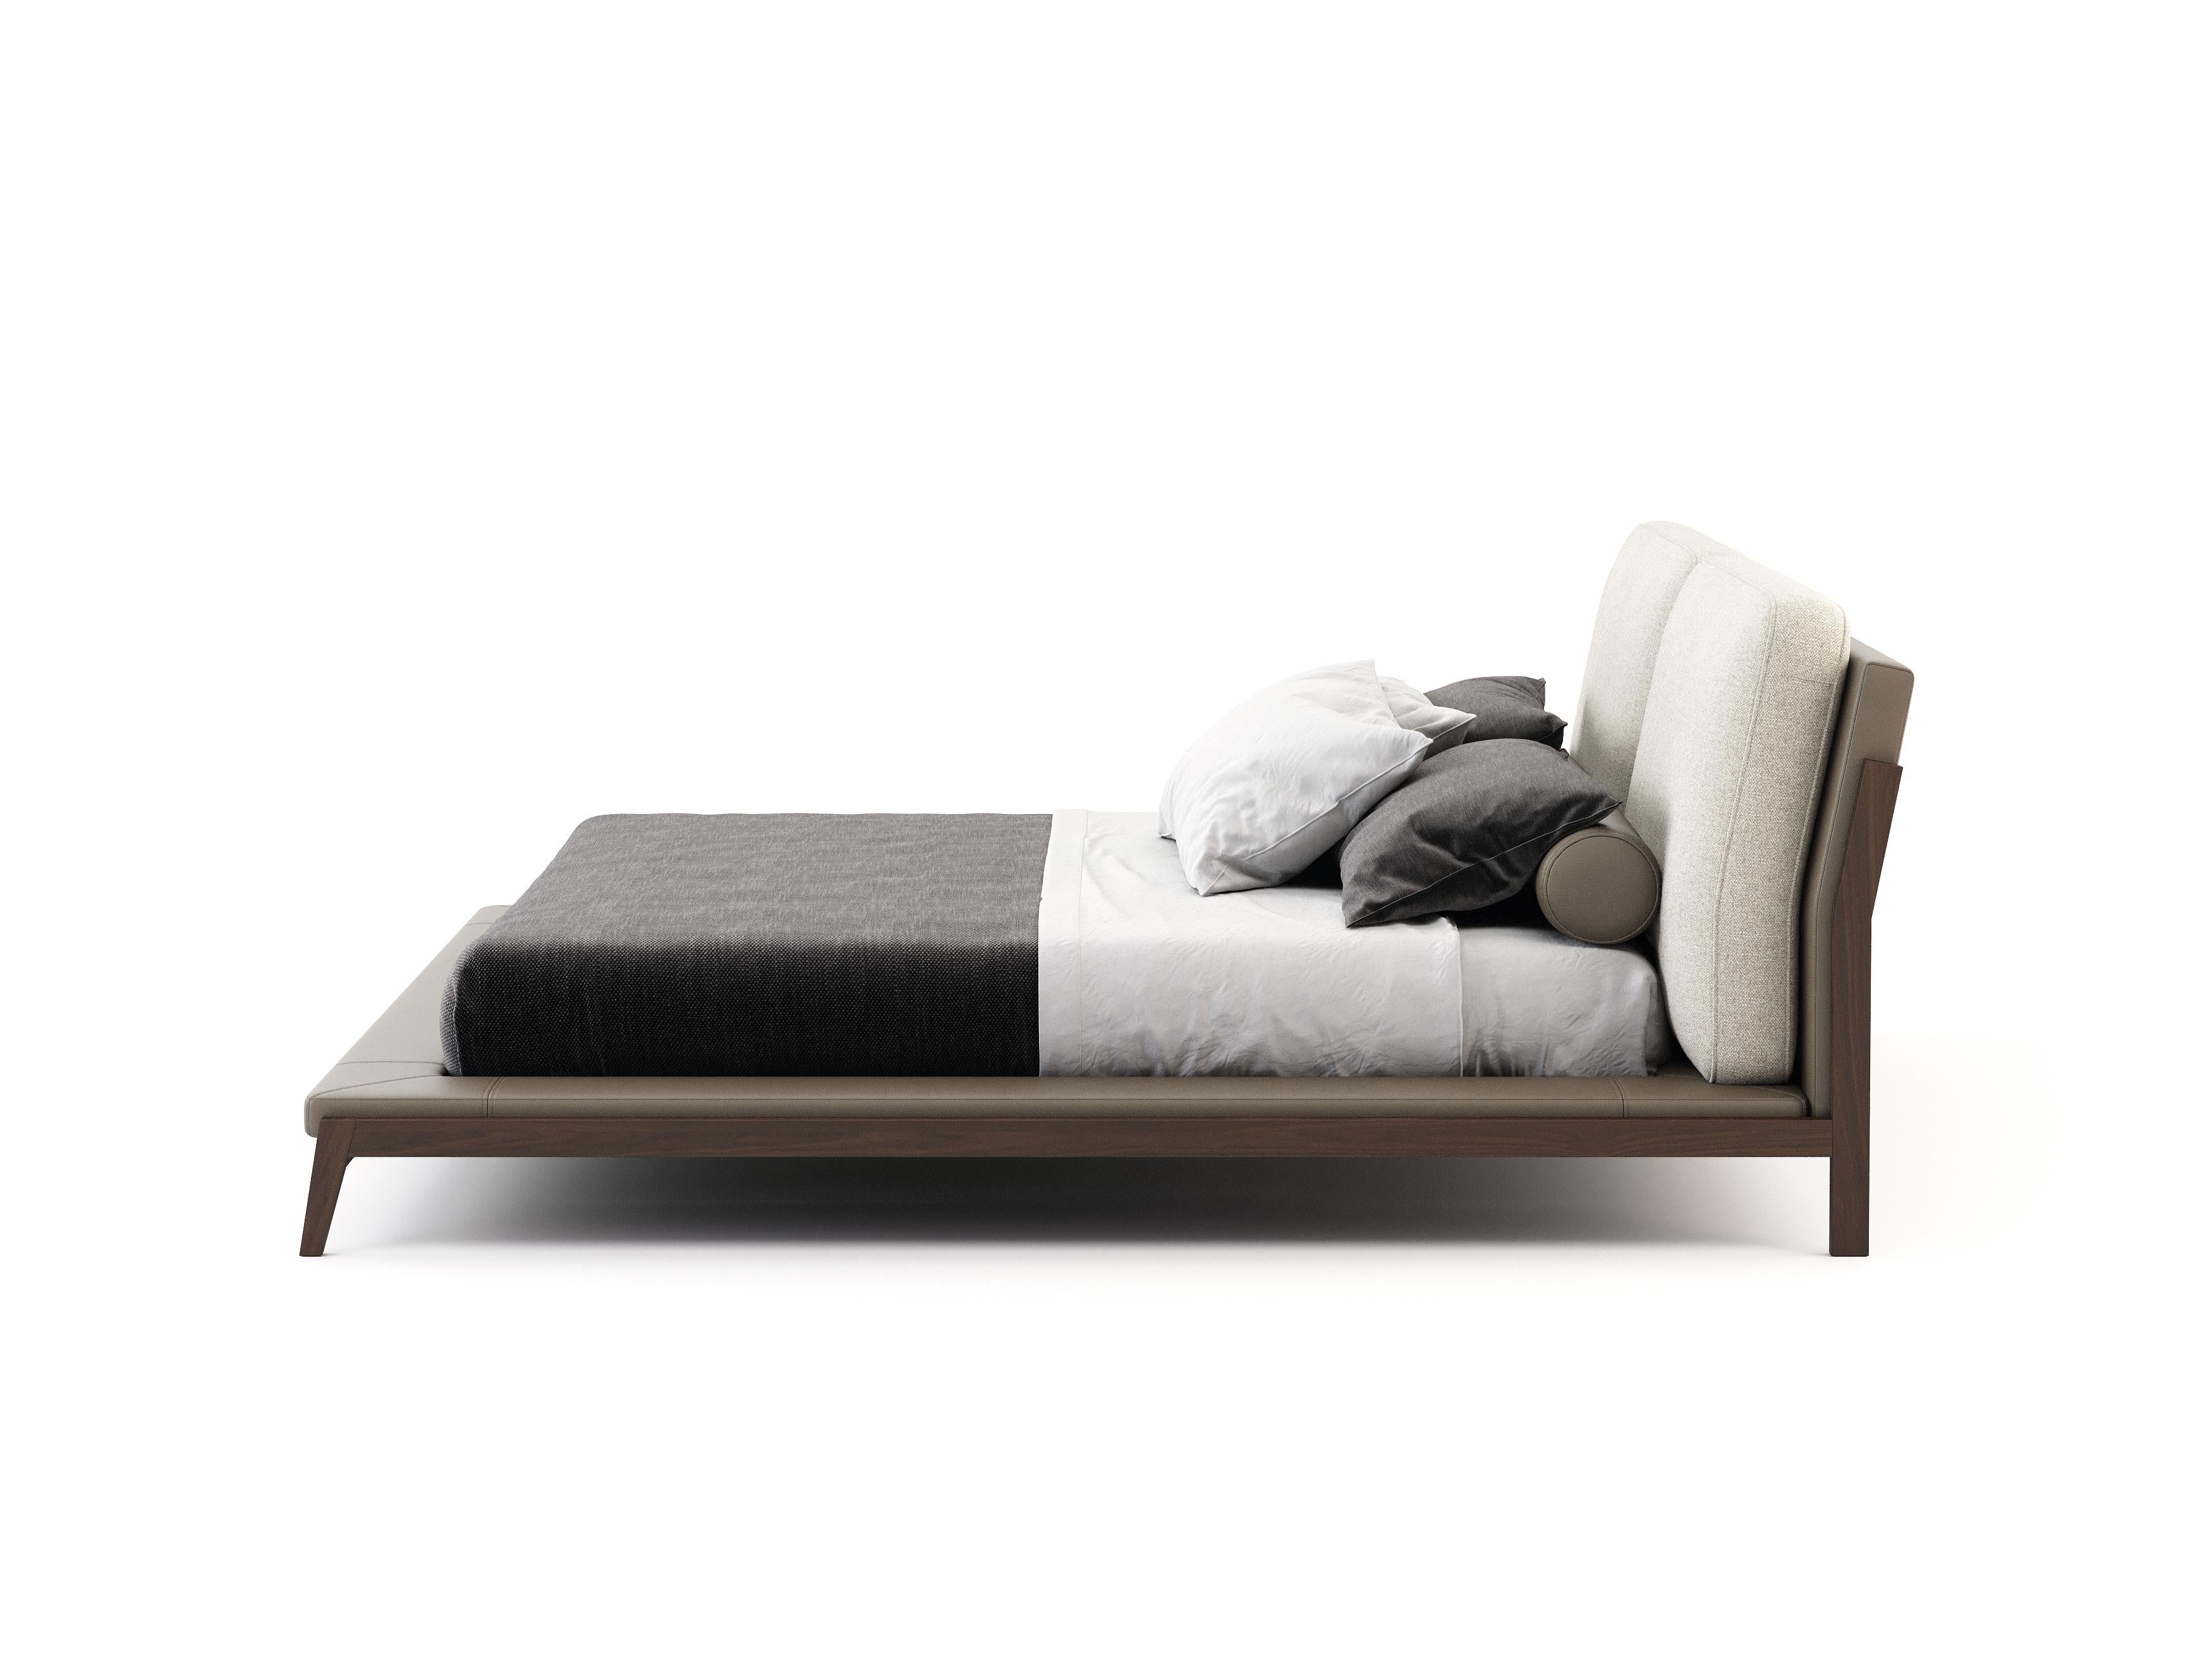 Hand-Crafted Double Modern Milos Bed Made with Walnut and Leather, Handmade by Stylish Club For Sale